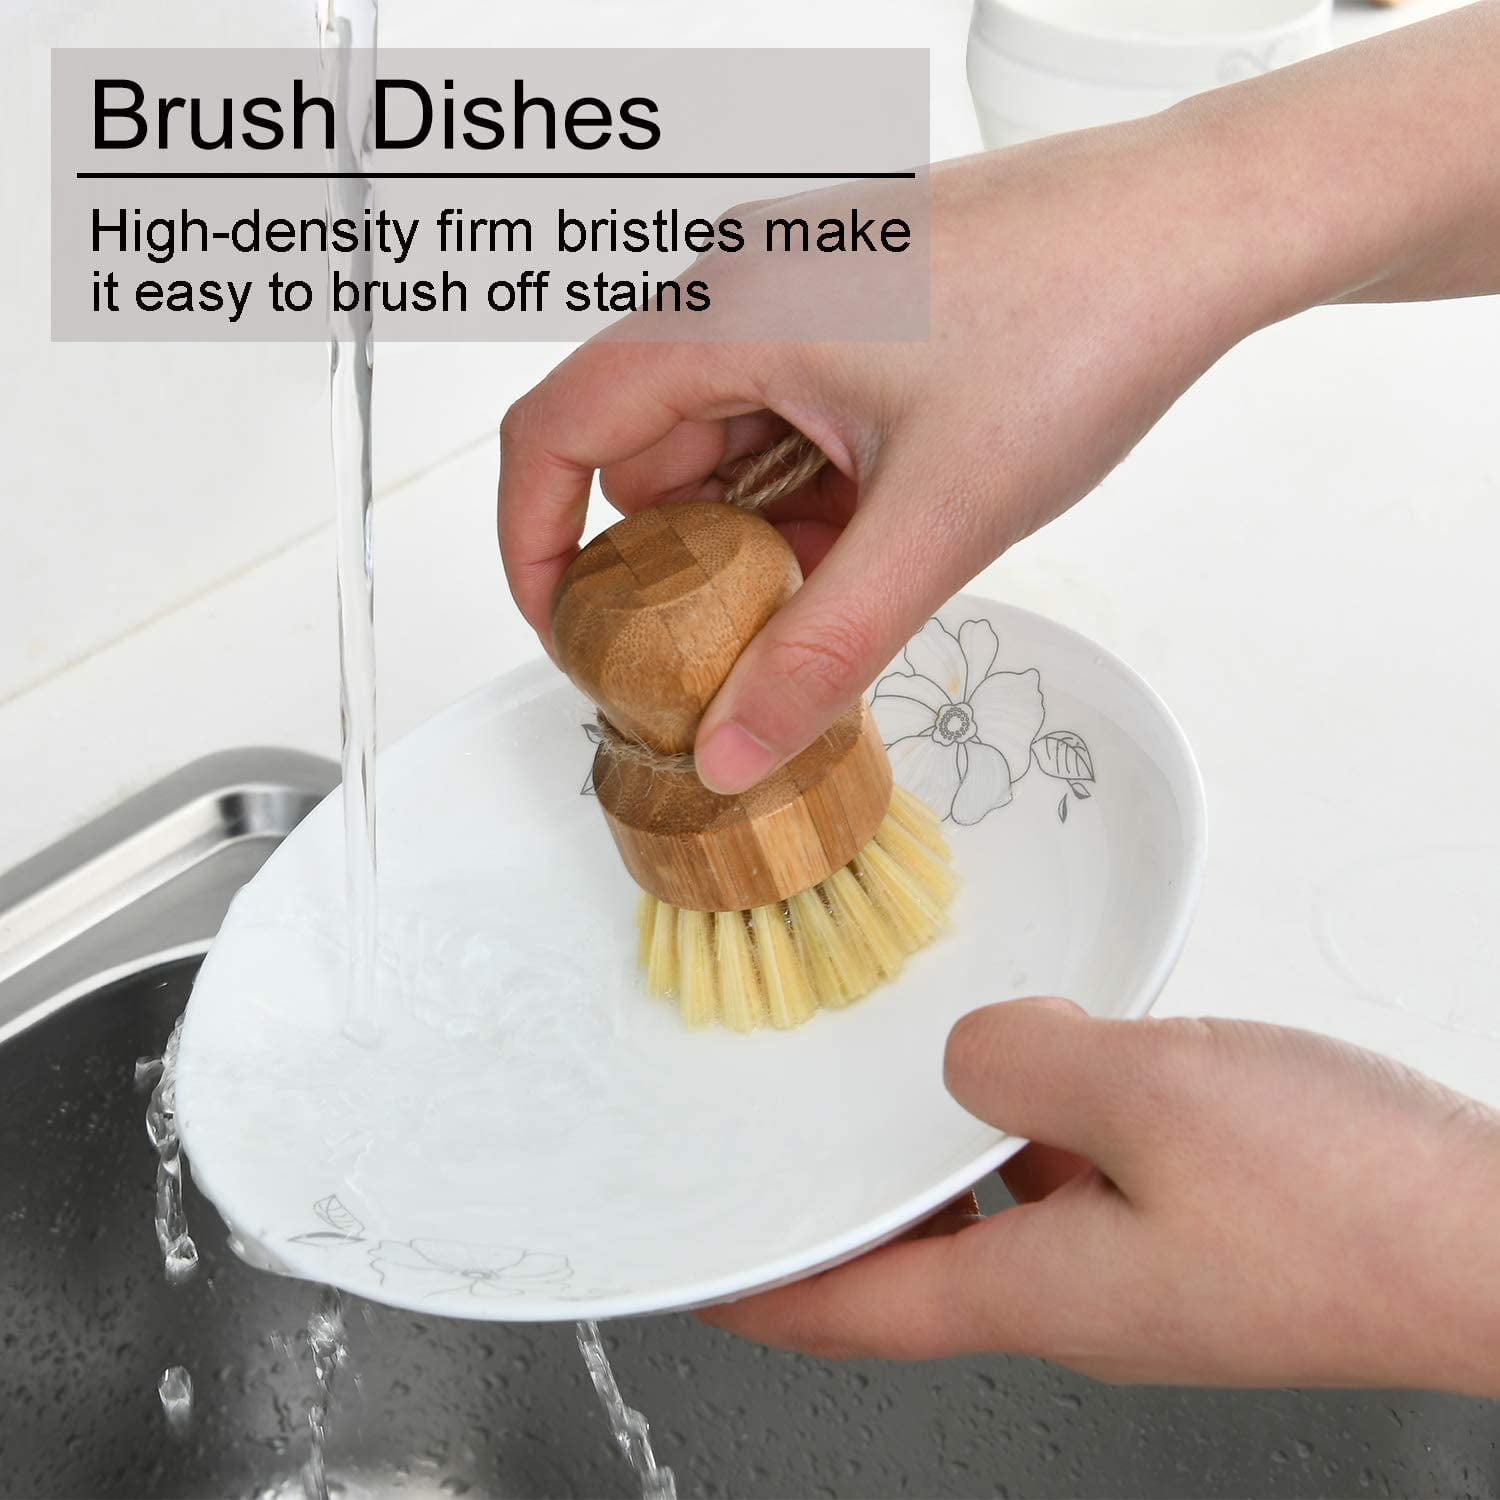 Heritage Products Cast Iron Scrub Brush, Palm Brush Kitchen Dish Scrubber  with Natural Bamboo Wood Handle and Densely Packed Nylon Bristles Protects